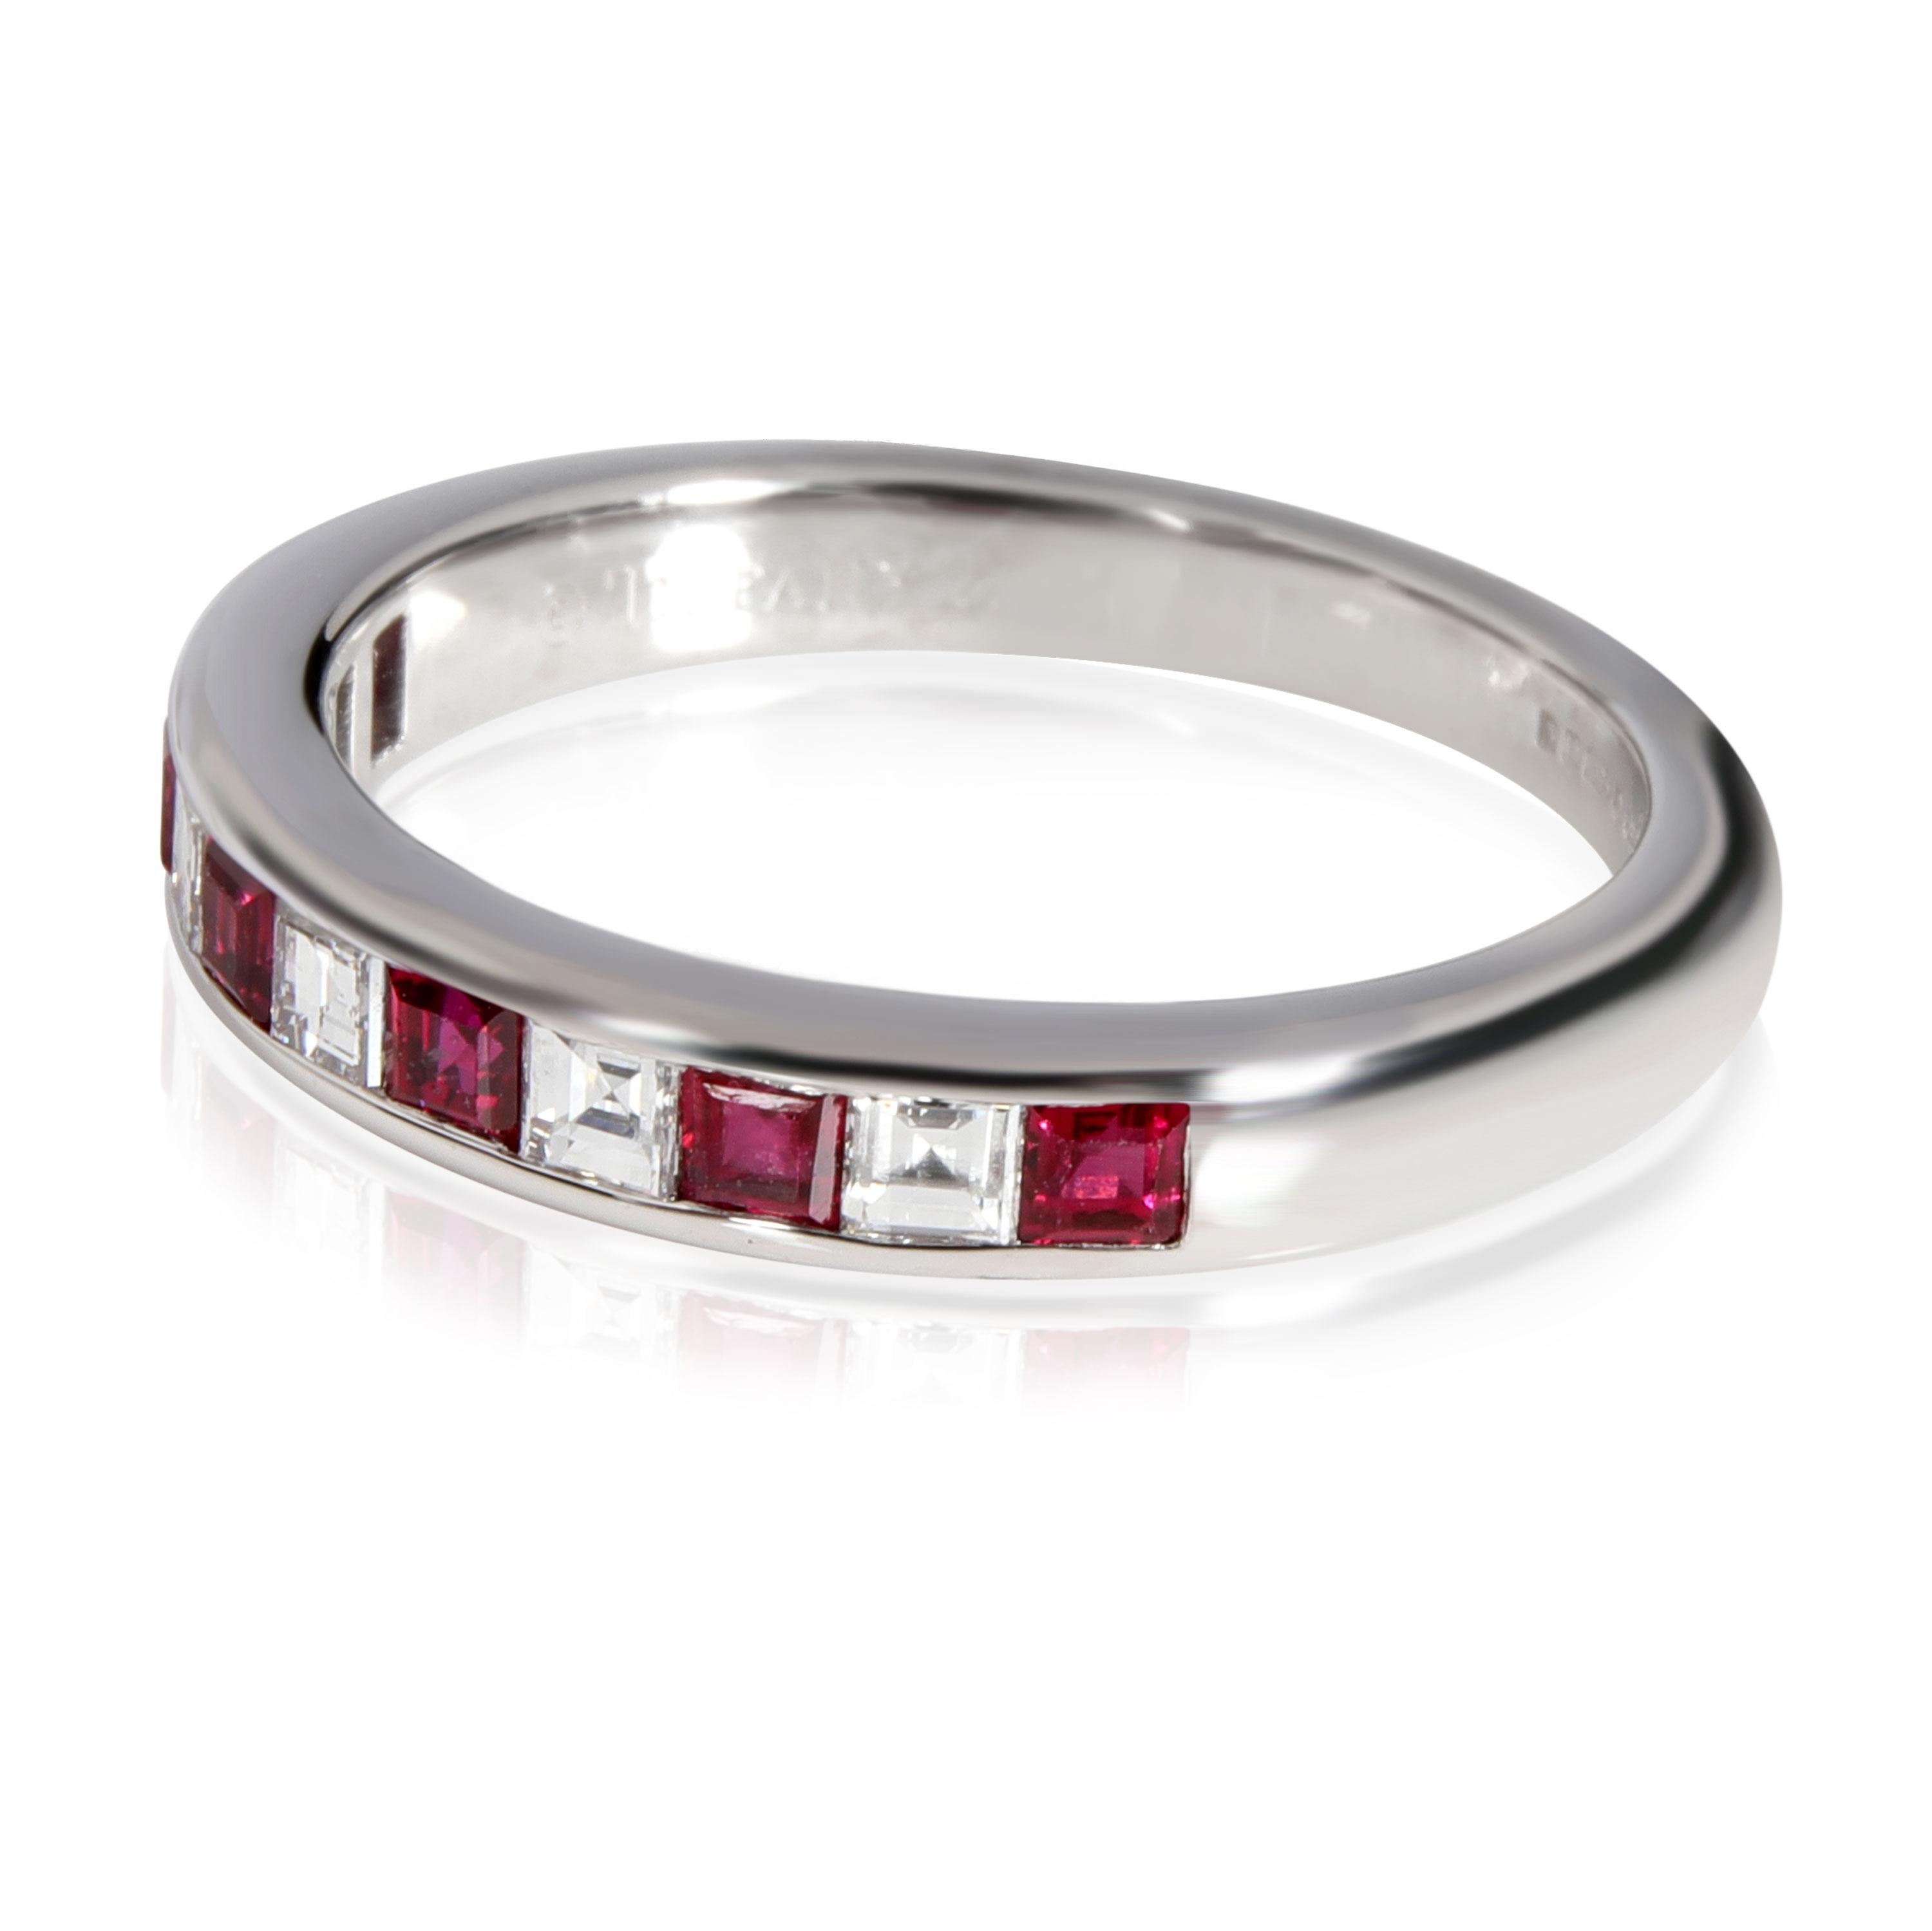 Square Cut Tiffany & Co. Channel Set Ruby Diamond Band in Platinum 0.25 Carat